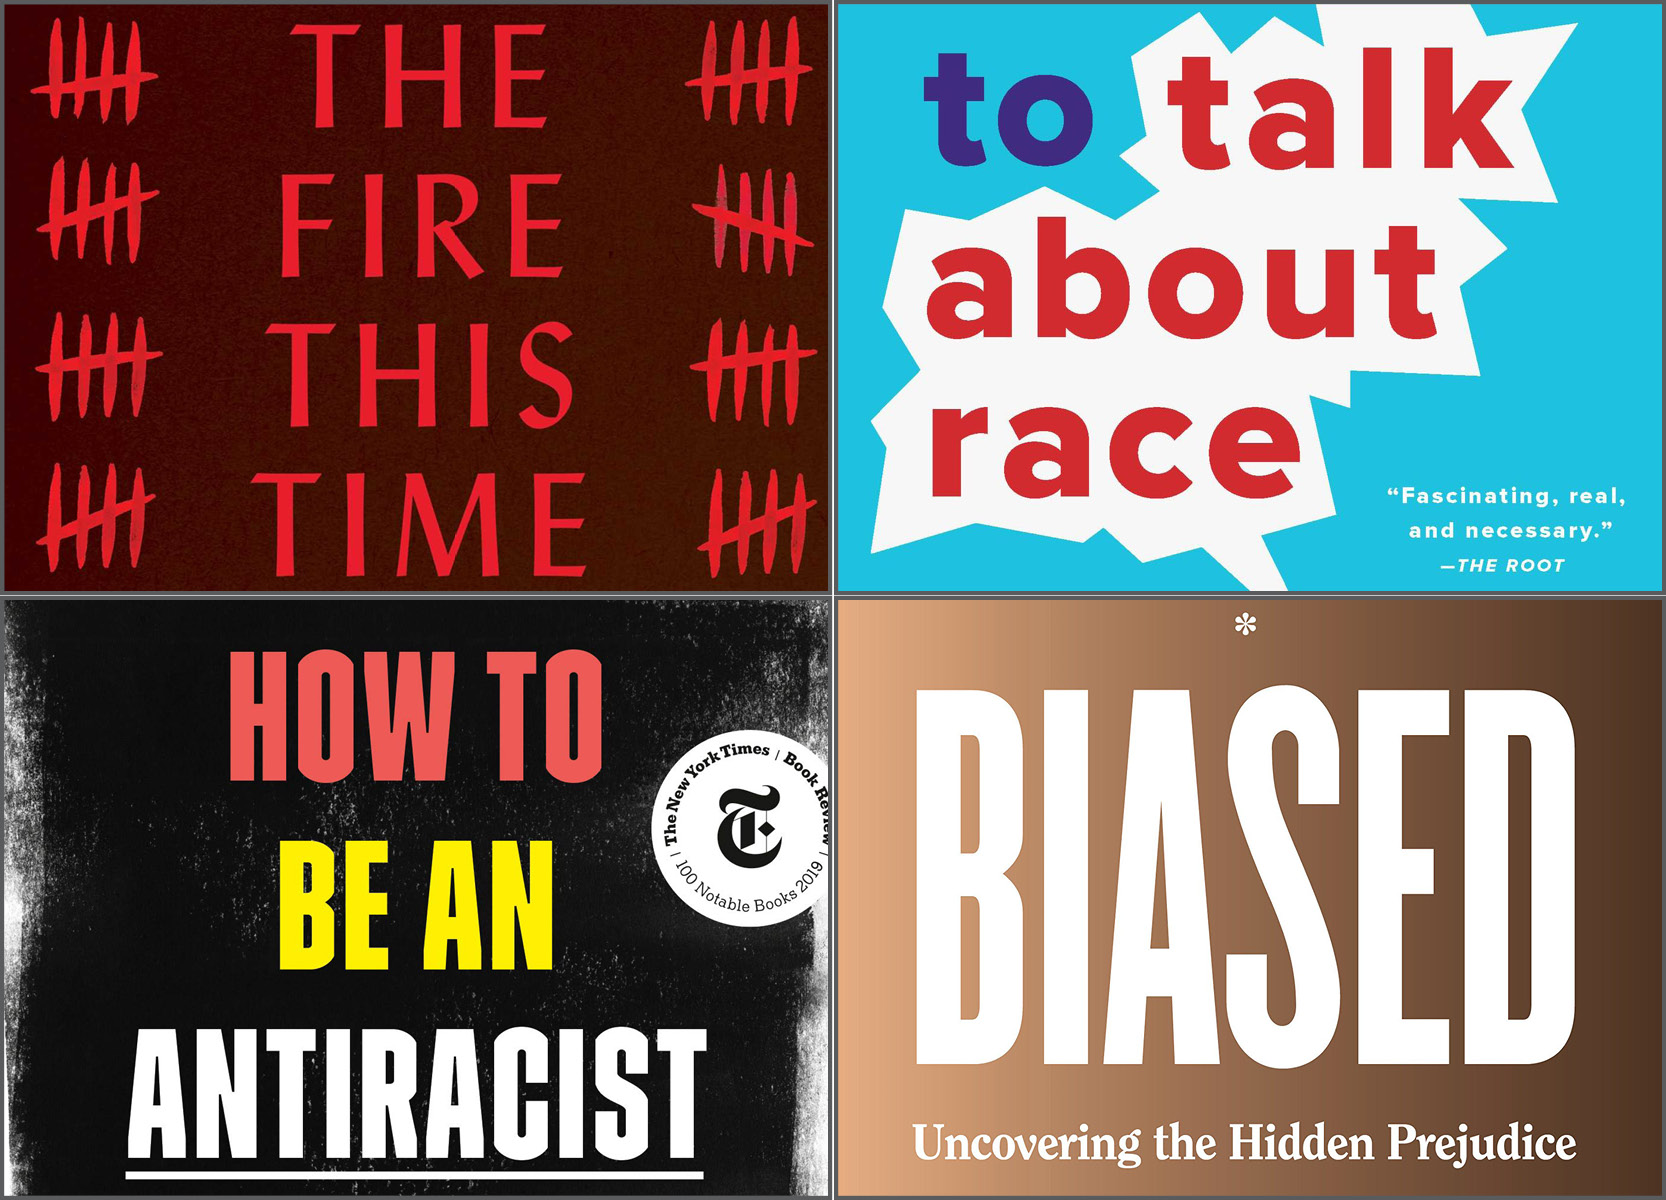 A reading list to better understand race, racism in America